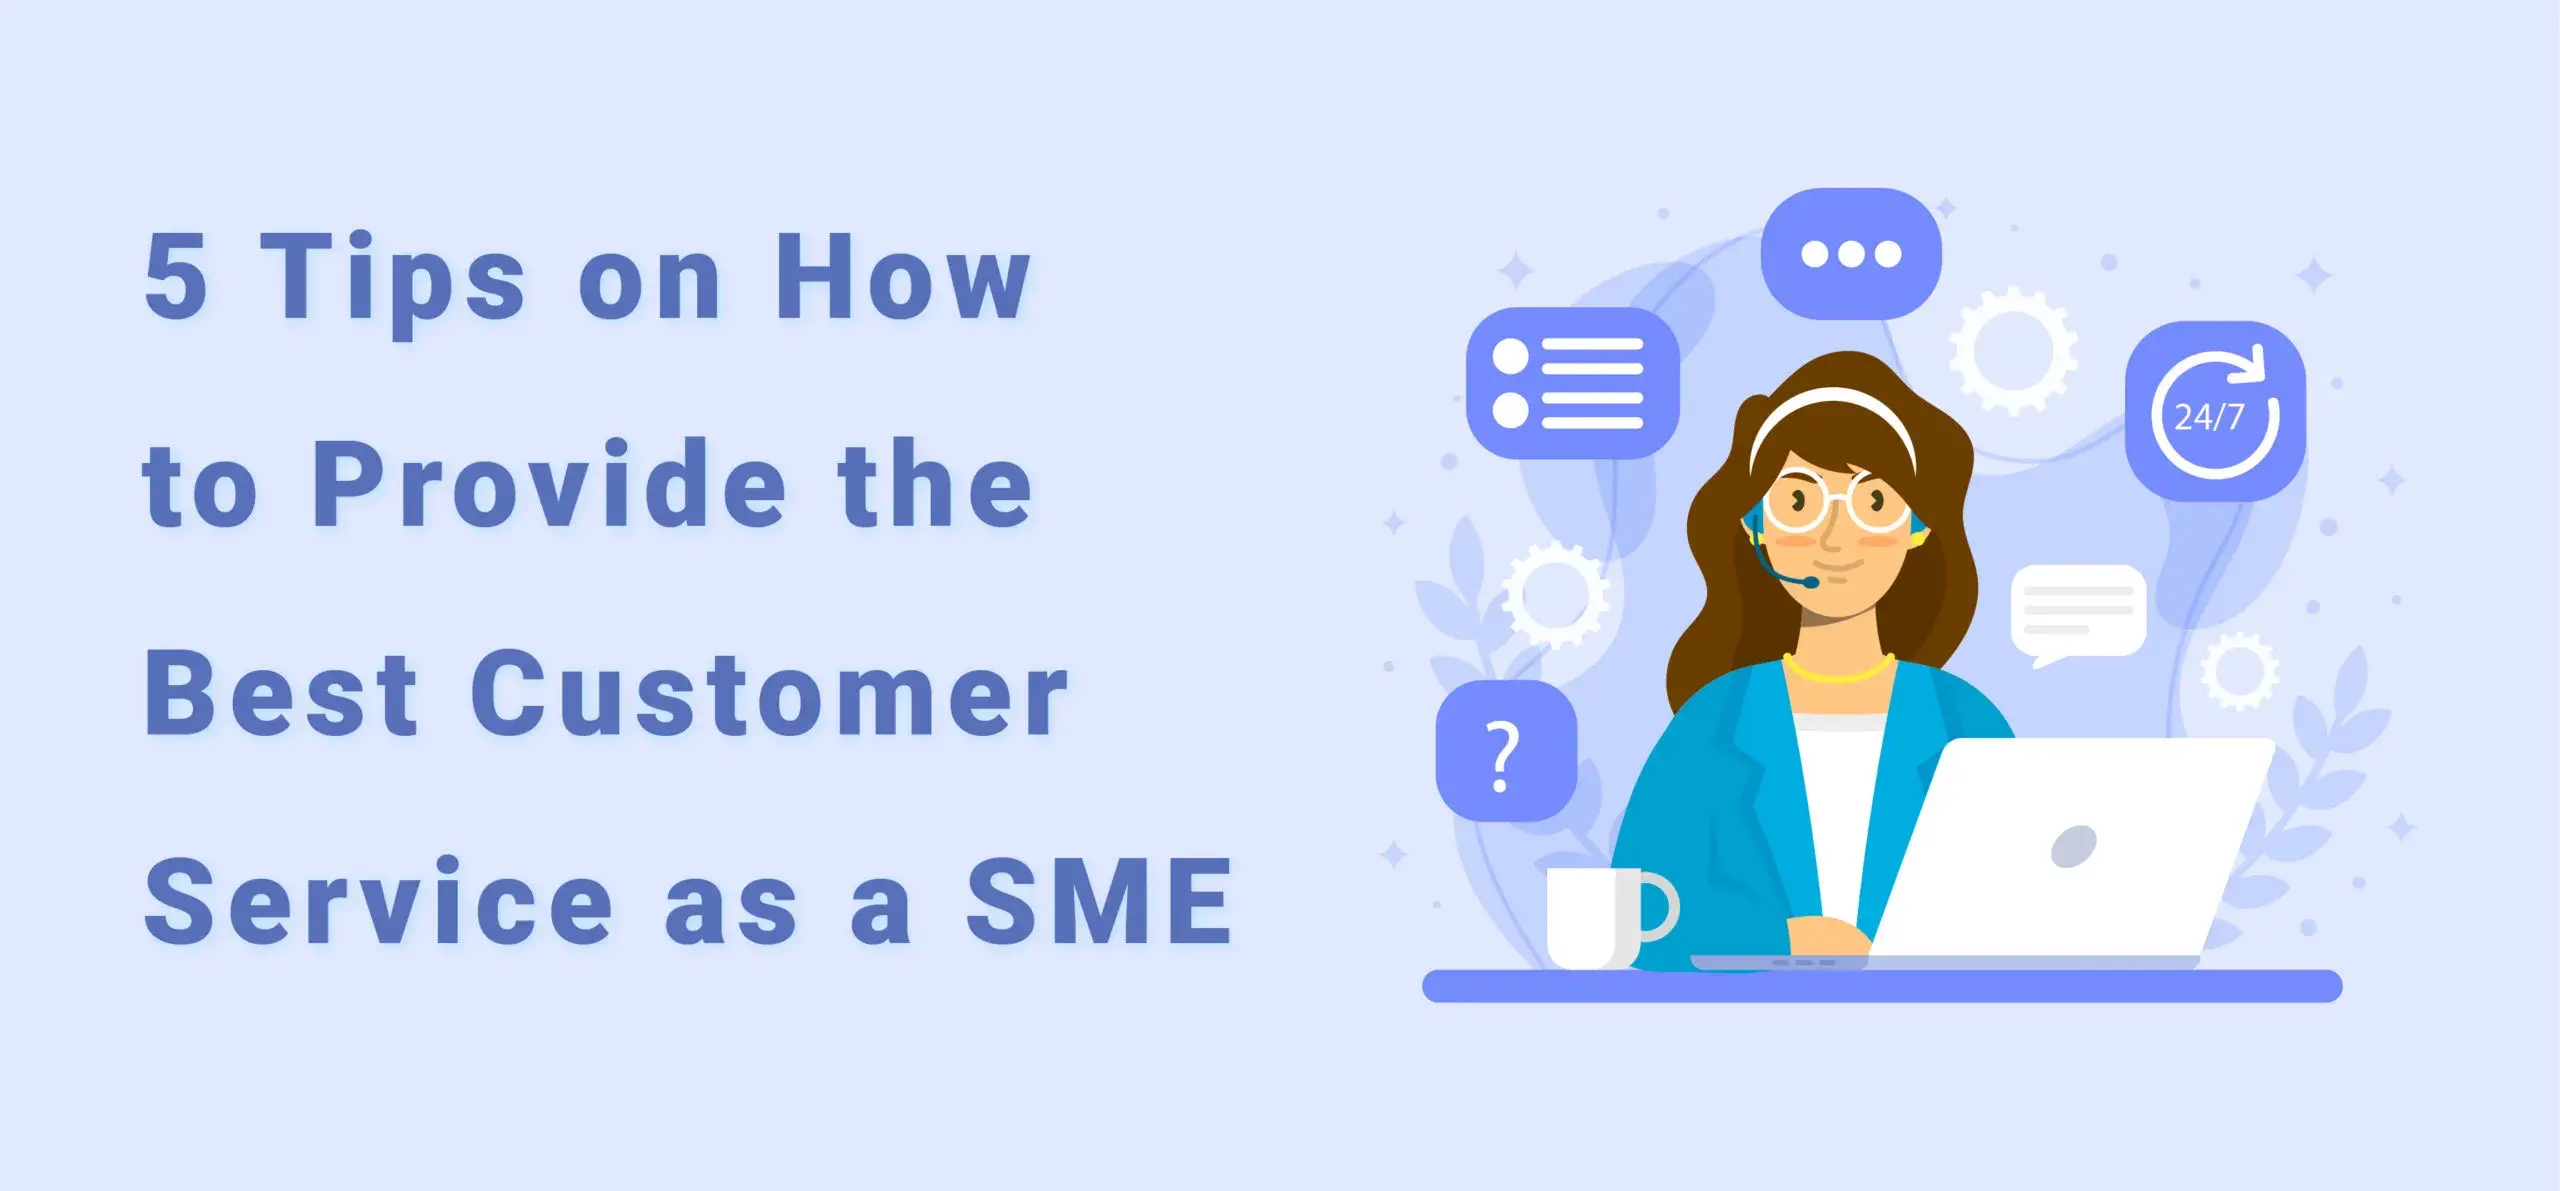 5 Tips on How to Provide the Best Customer Service as a SME